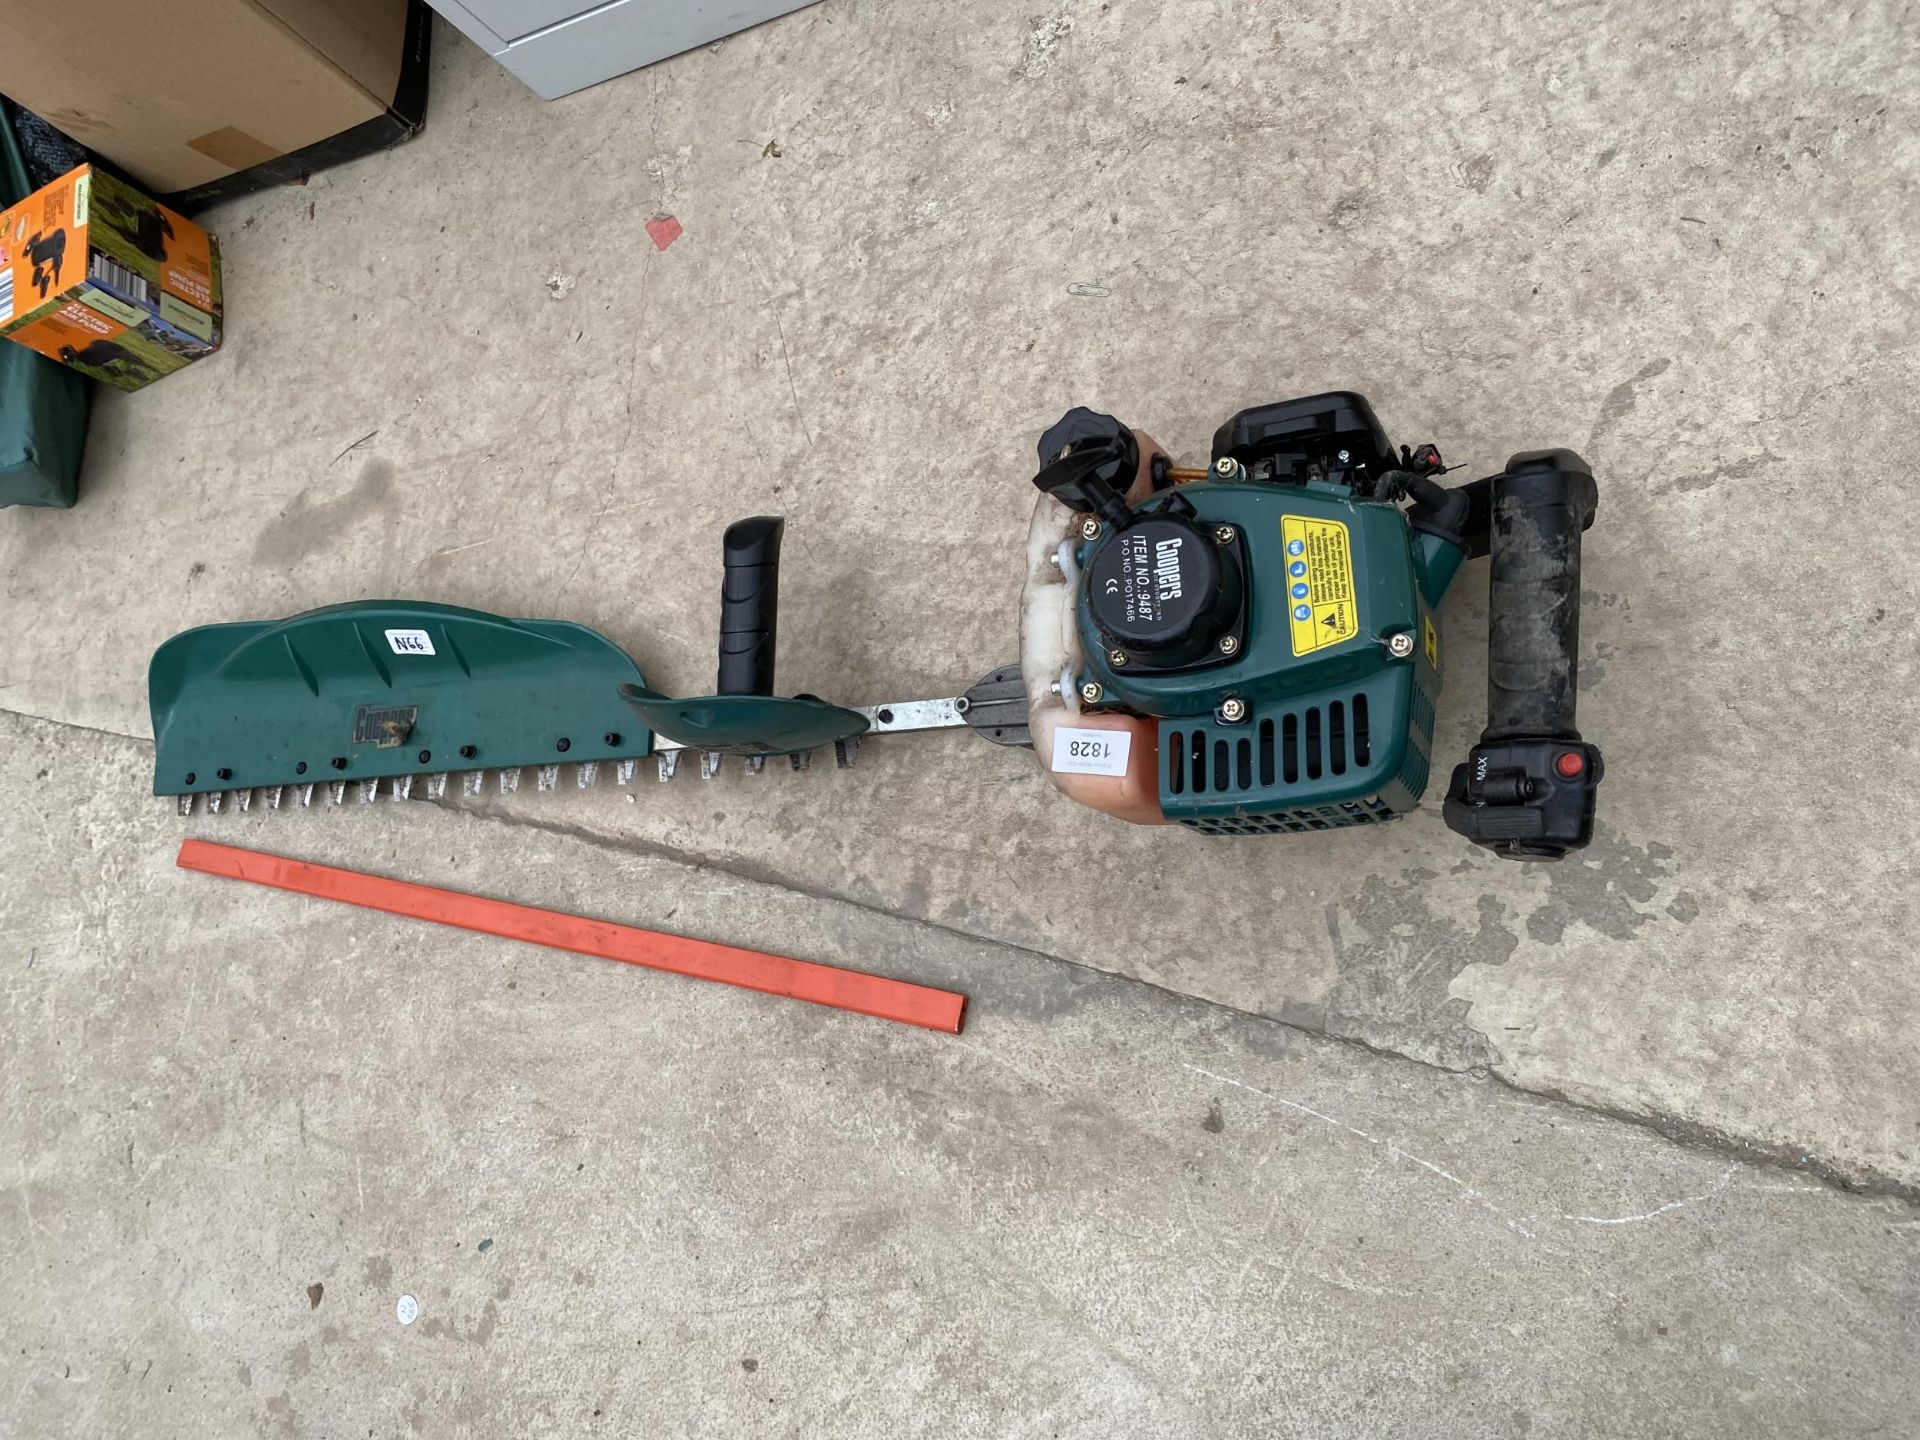 A COPPERS 9487 PETROL HEDGE TRIMMER